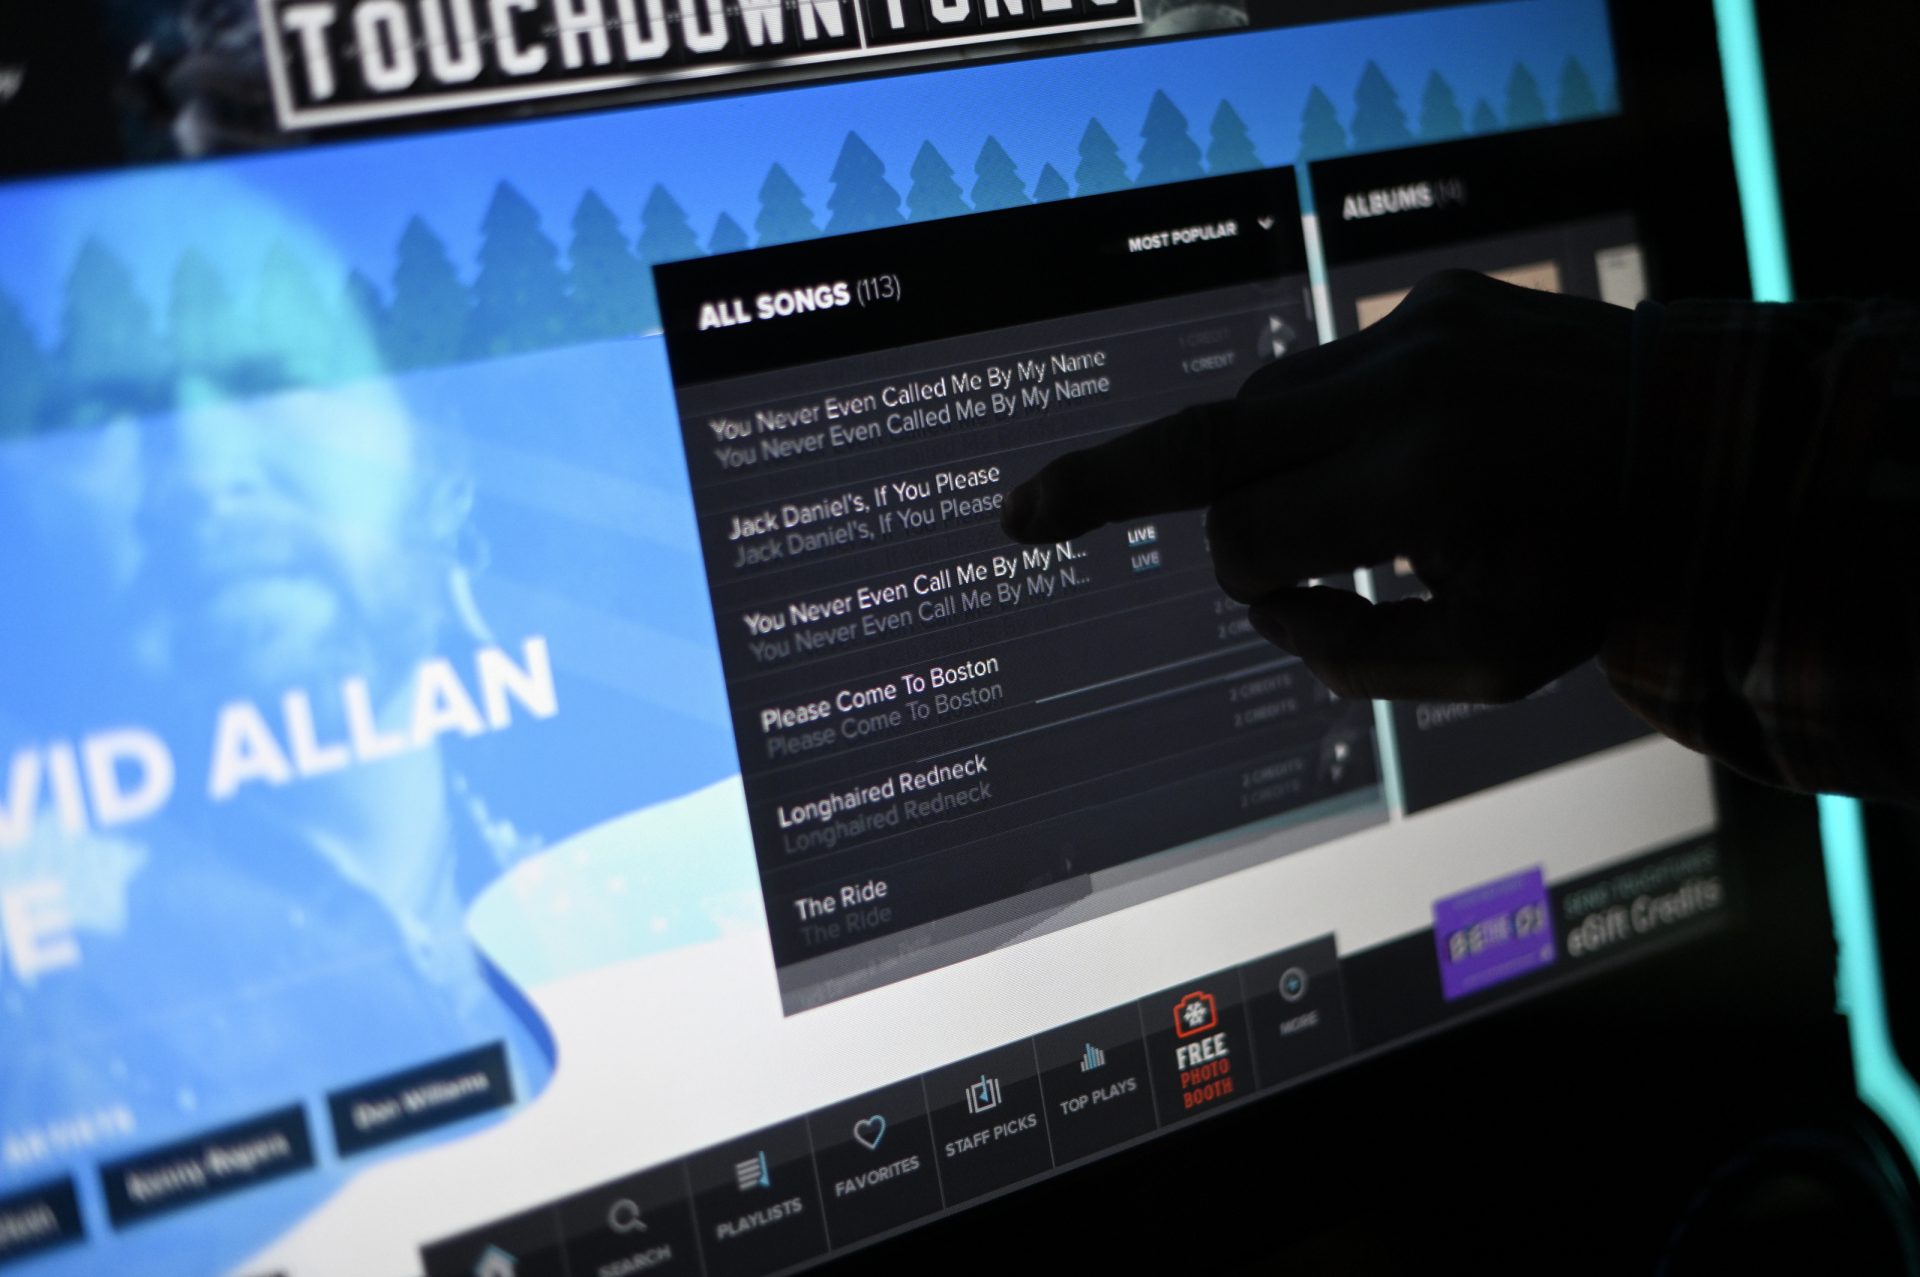 The touchscreen of a jukebox at Deer Lake & West Brunswick Fire Company No. 1. featuring the music of David Allan Coe.